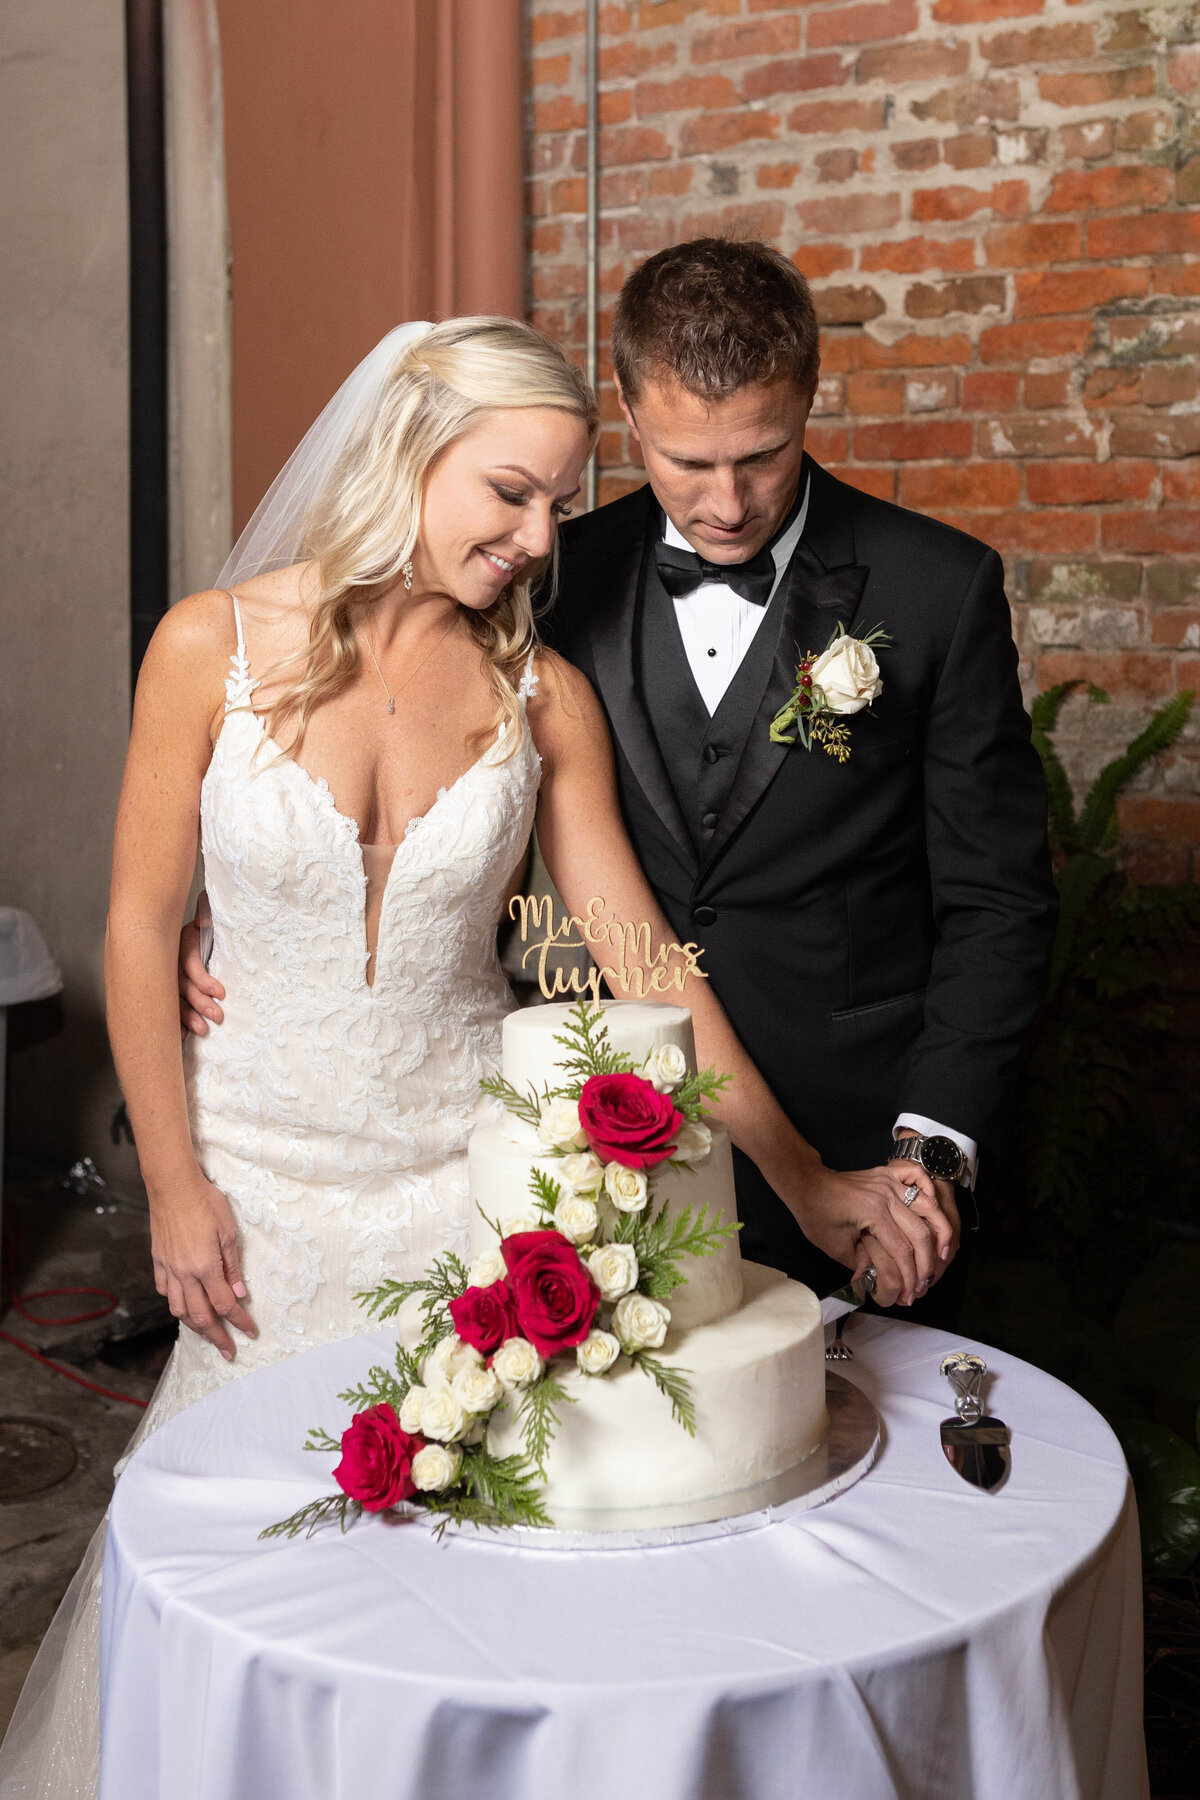 The new couple cuts the cake at their wedding reception in New Orleans, Louisiana at the Pharmacy Museum.